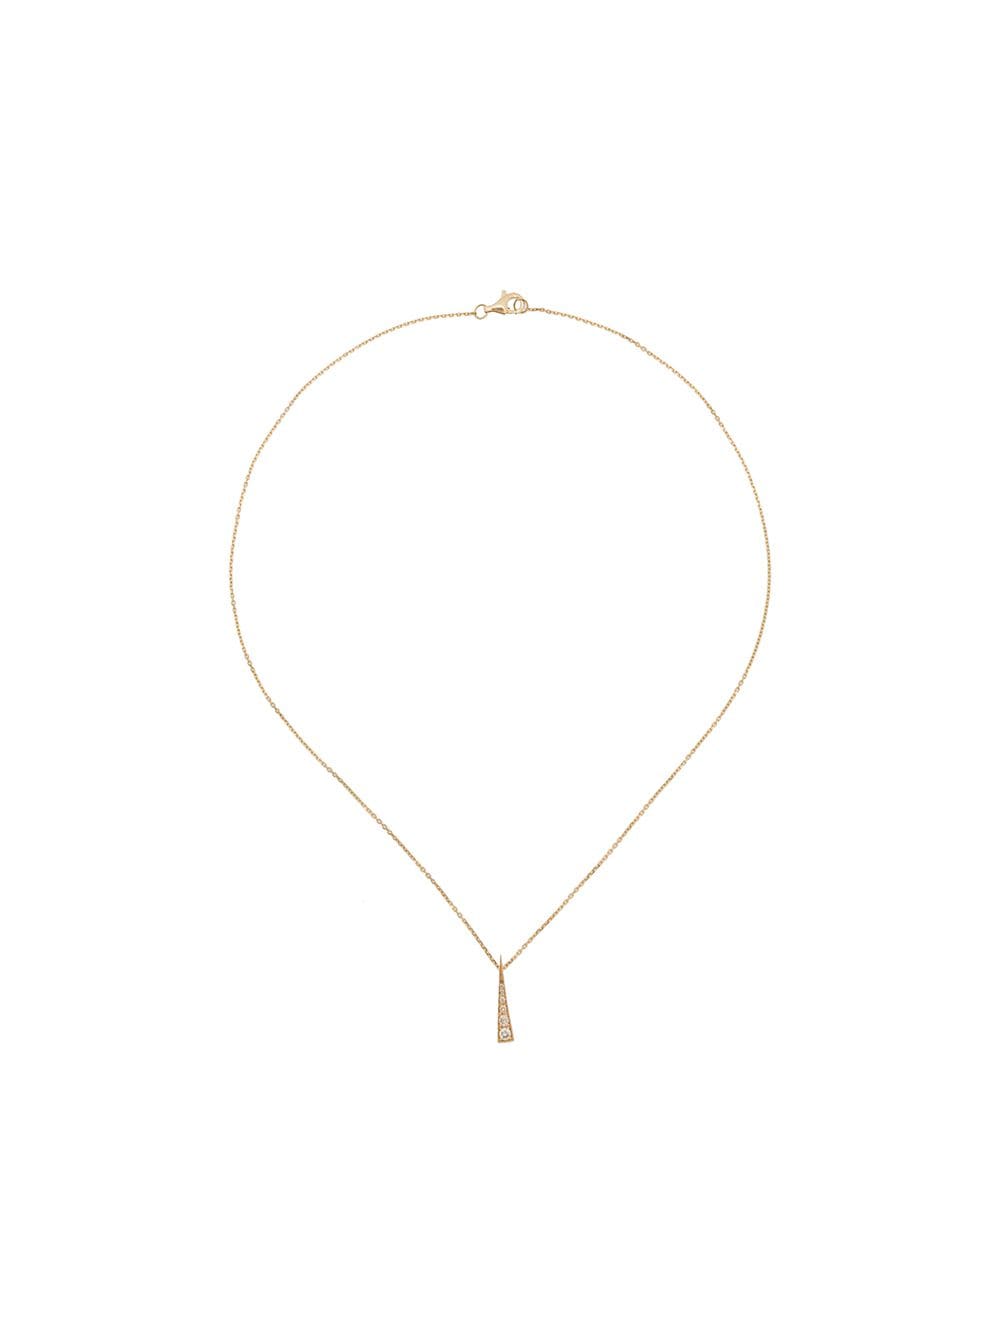 Daou 18kt Yellow Gold Spark Diamond Convertible Necklace